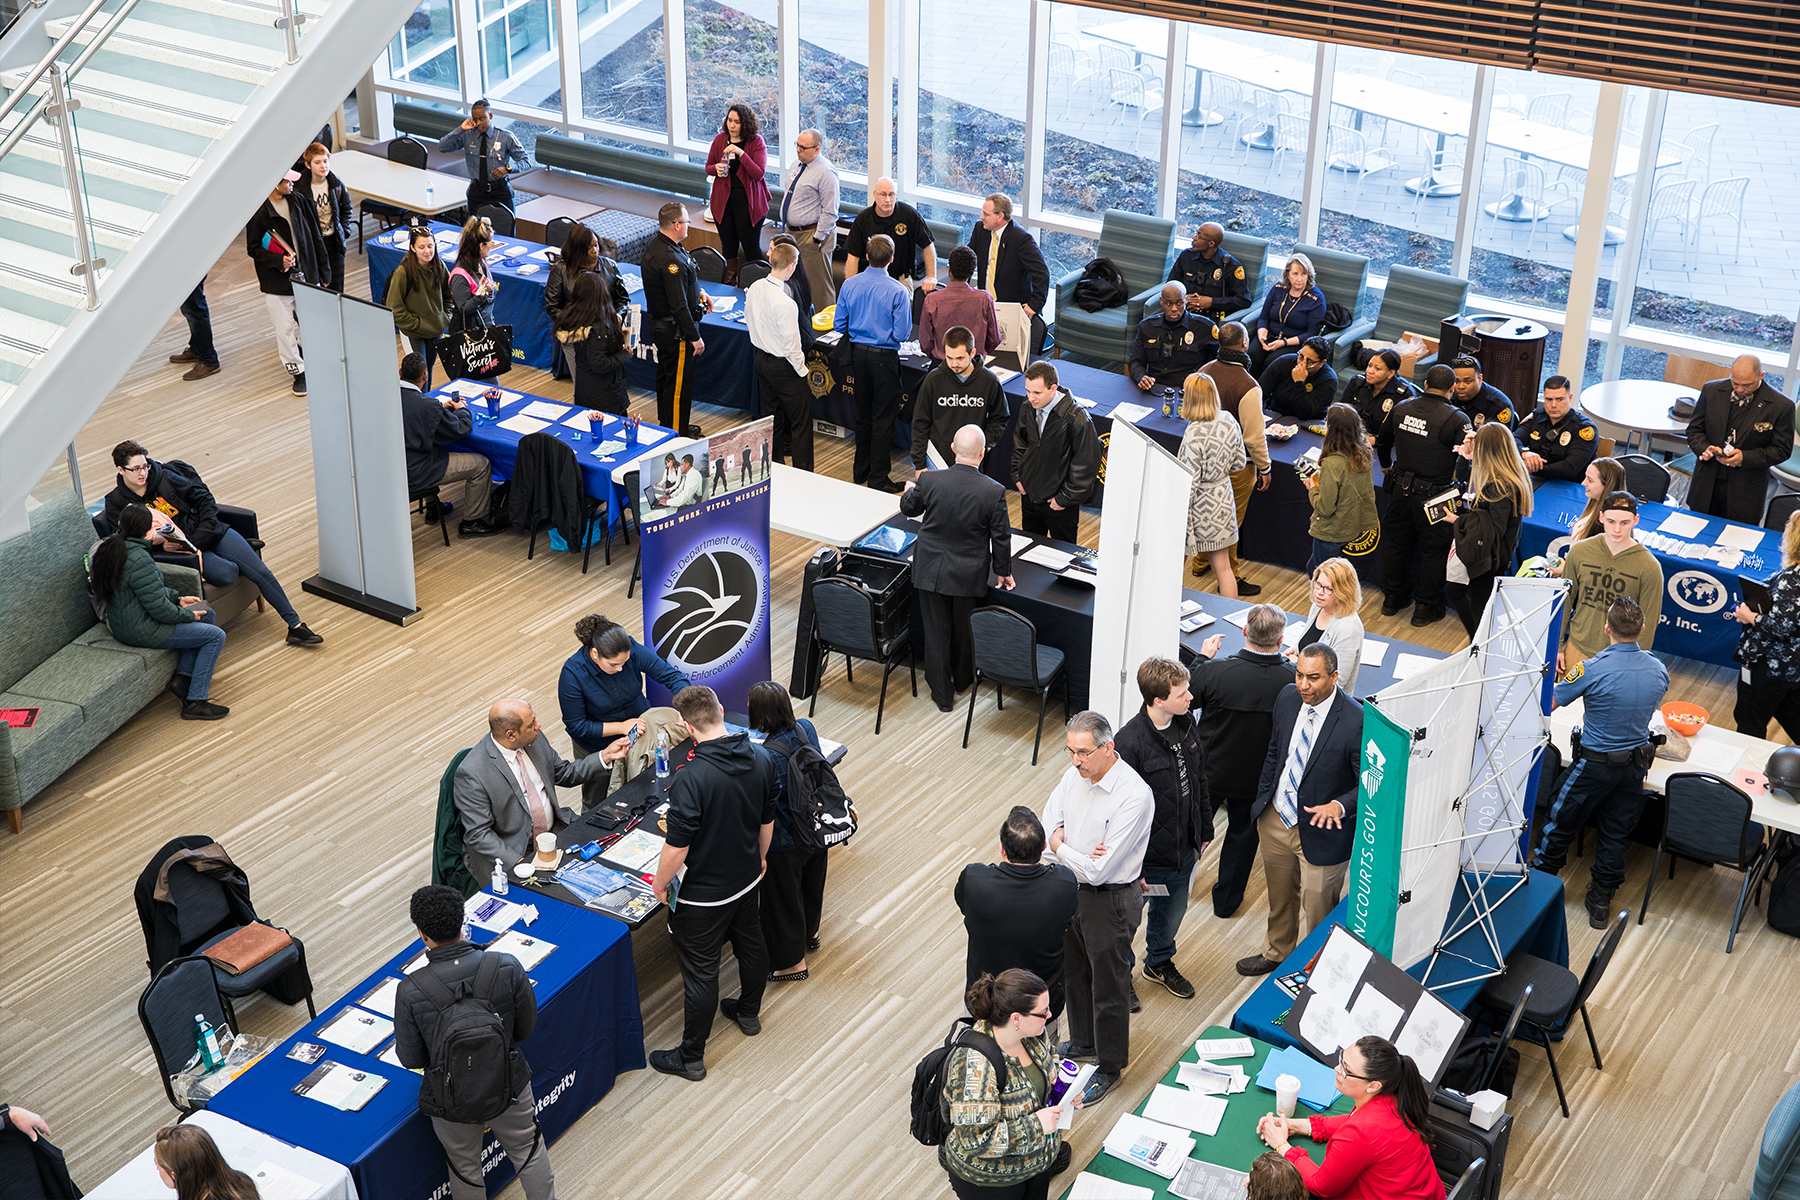 Overview of Career Day Event